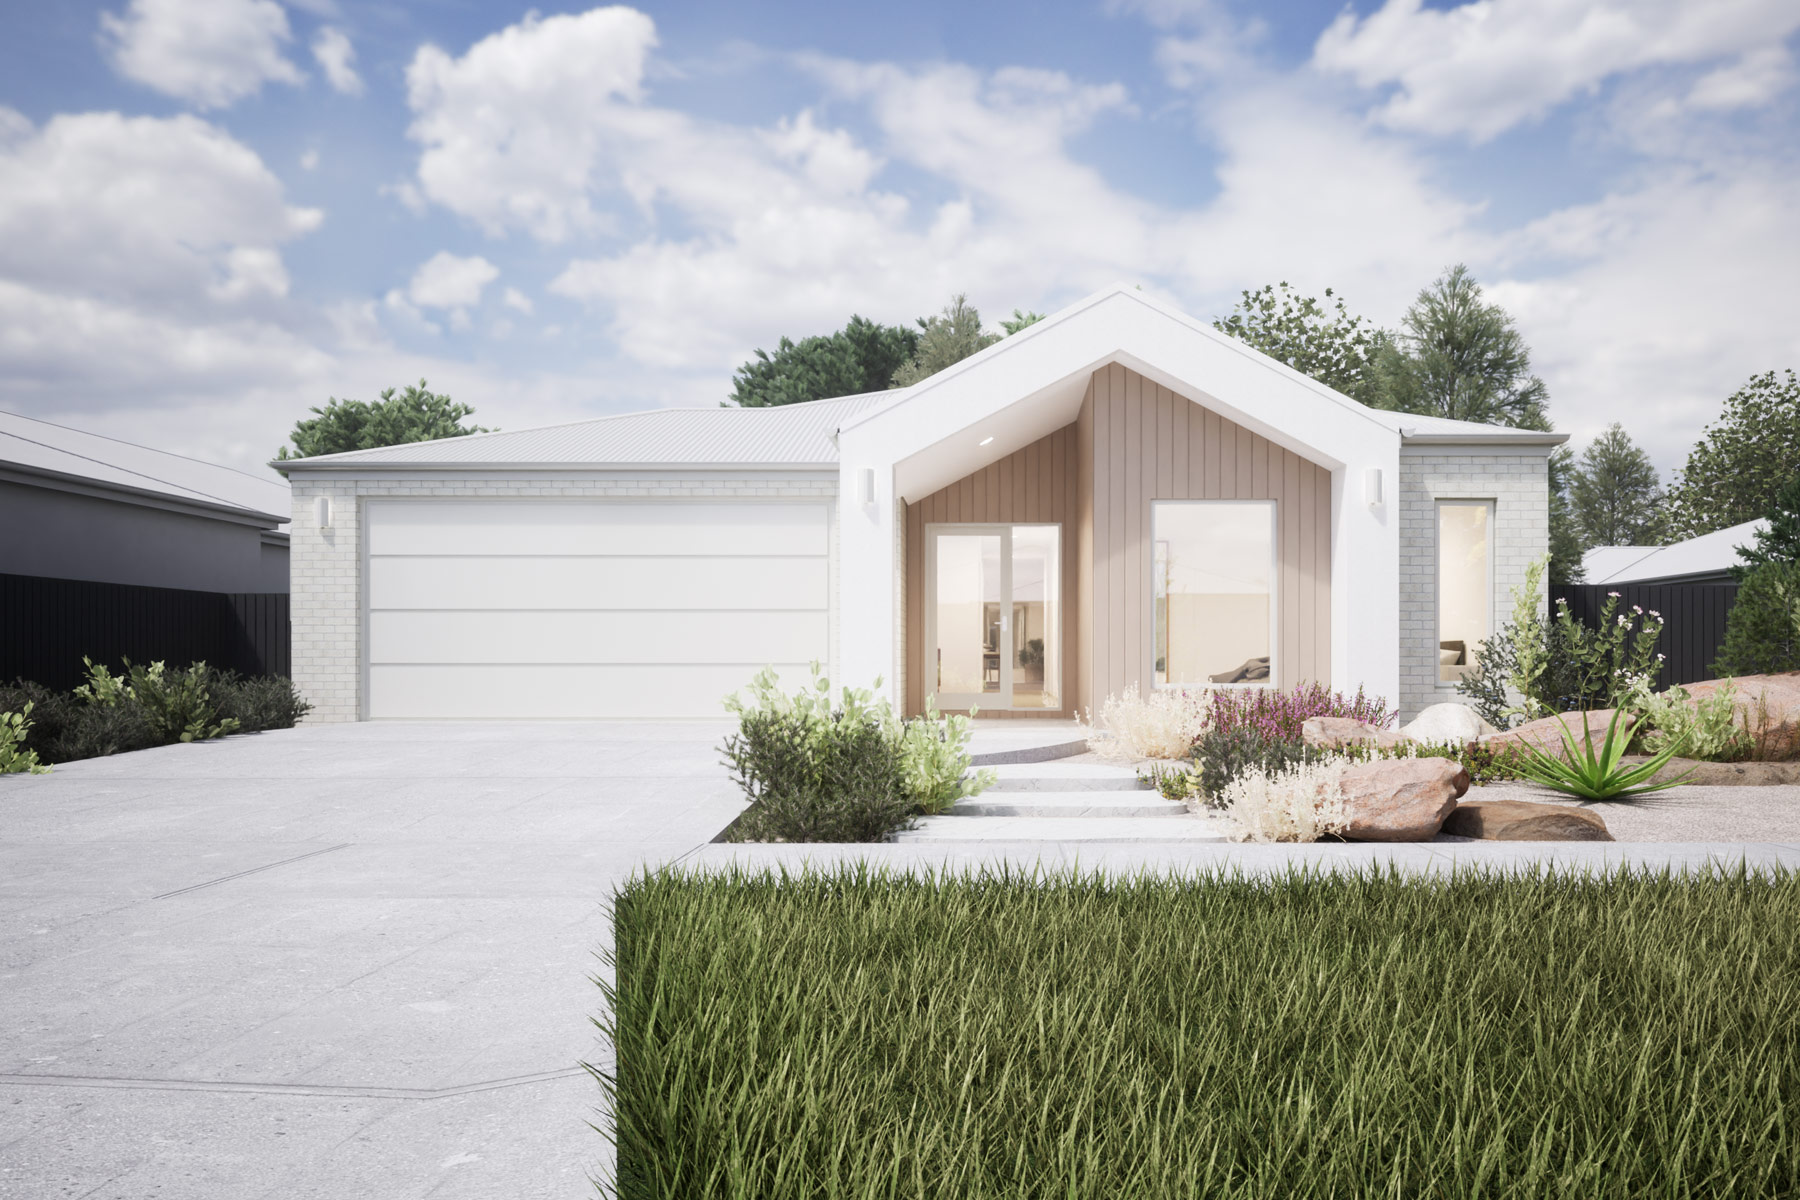 Artists impression of the facade of a home. The house is white with soft grey brick and timber features. The roofline features a modern gable entry. There is a blue sky with soft clouds, and a lush green lawn and garden infront of the home.